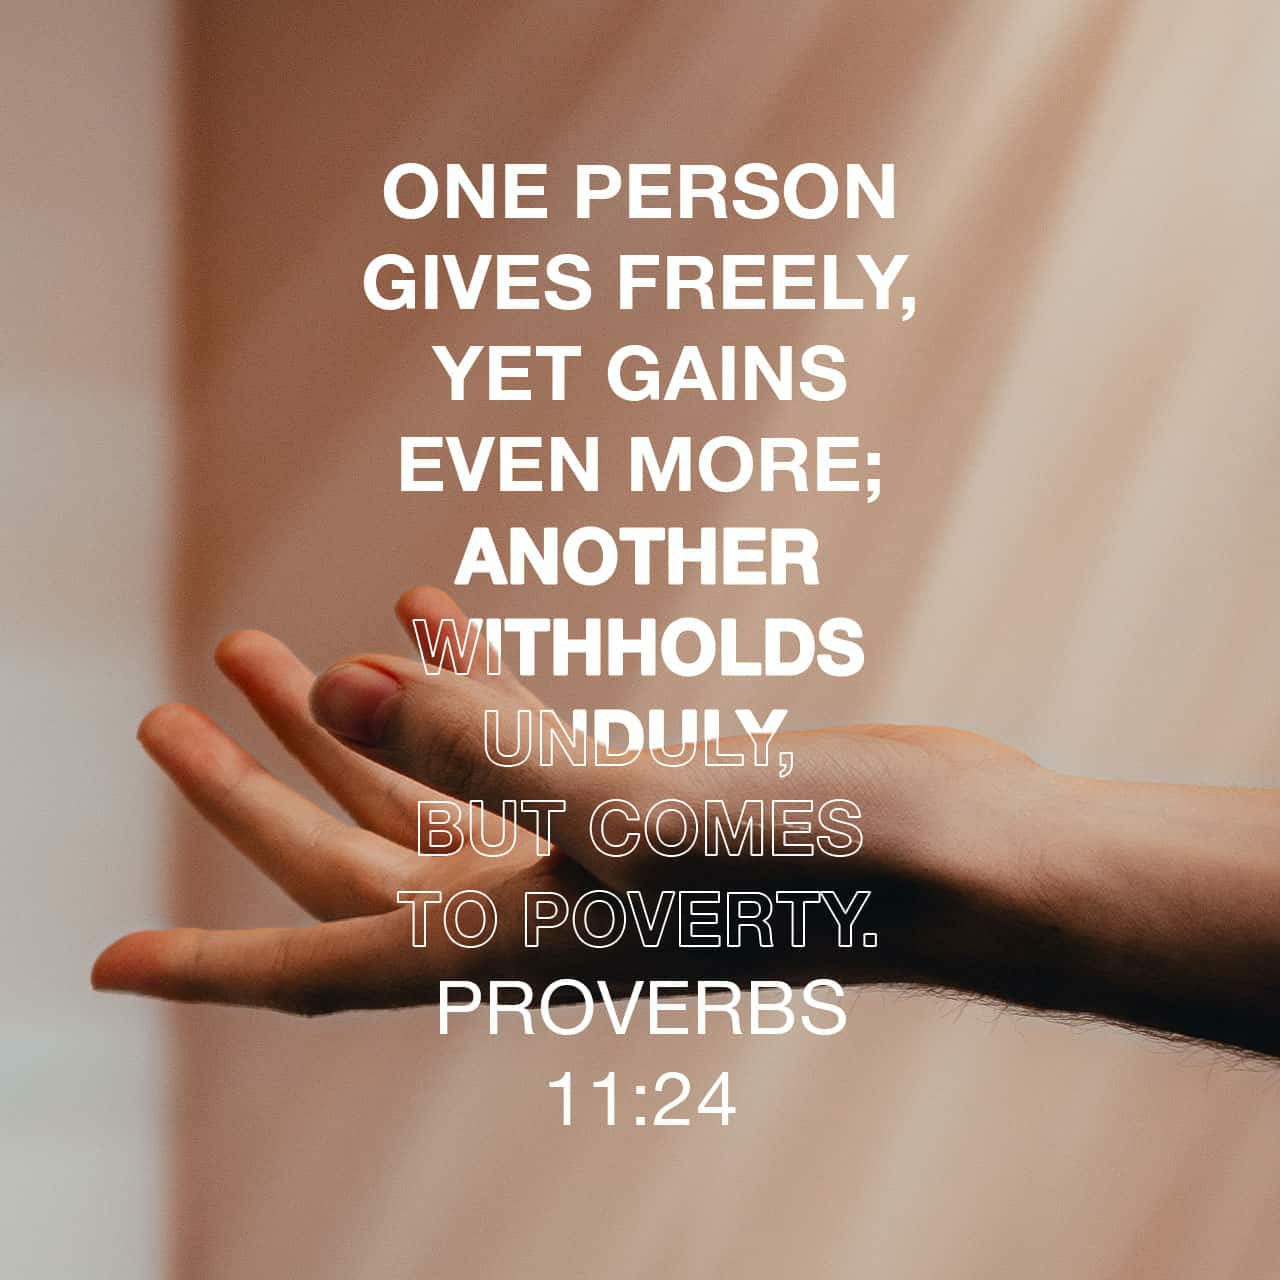 VERSES OF THE DAY- PROVERBS 11: 24-31 RIGHTEOUSNESS